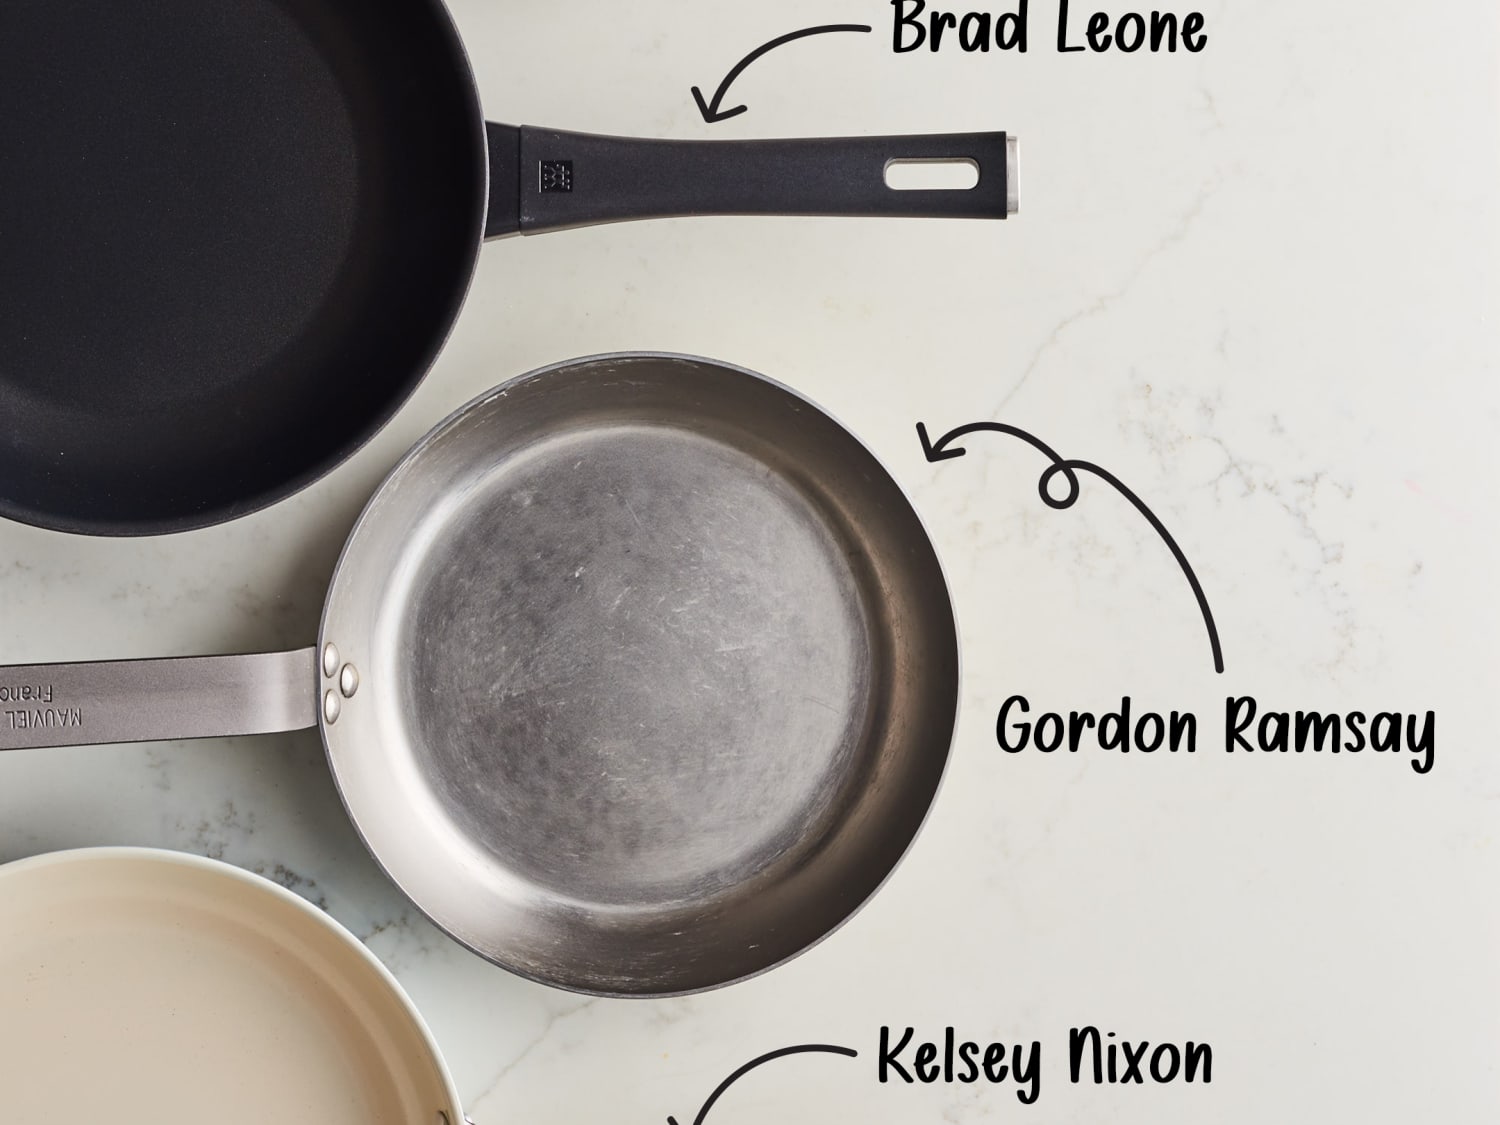 What Pans Does Gordon Ramsay Use? All Tools in Your Kitchen